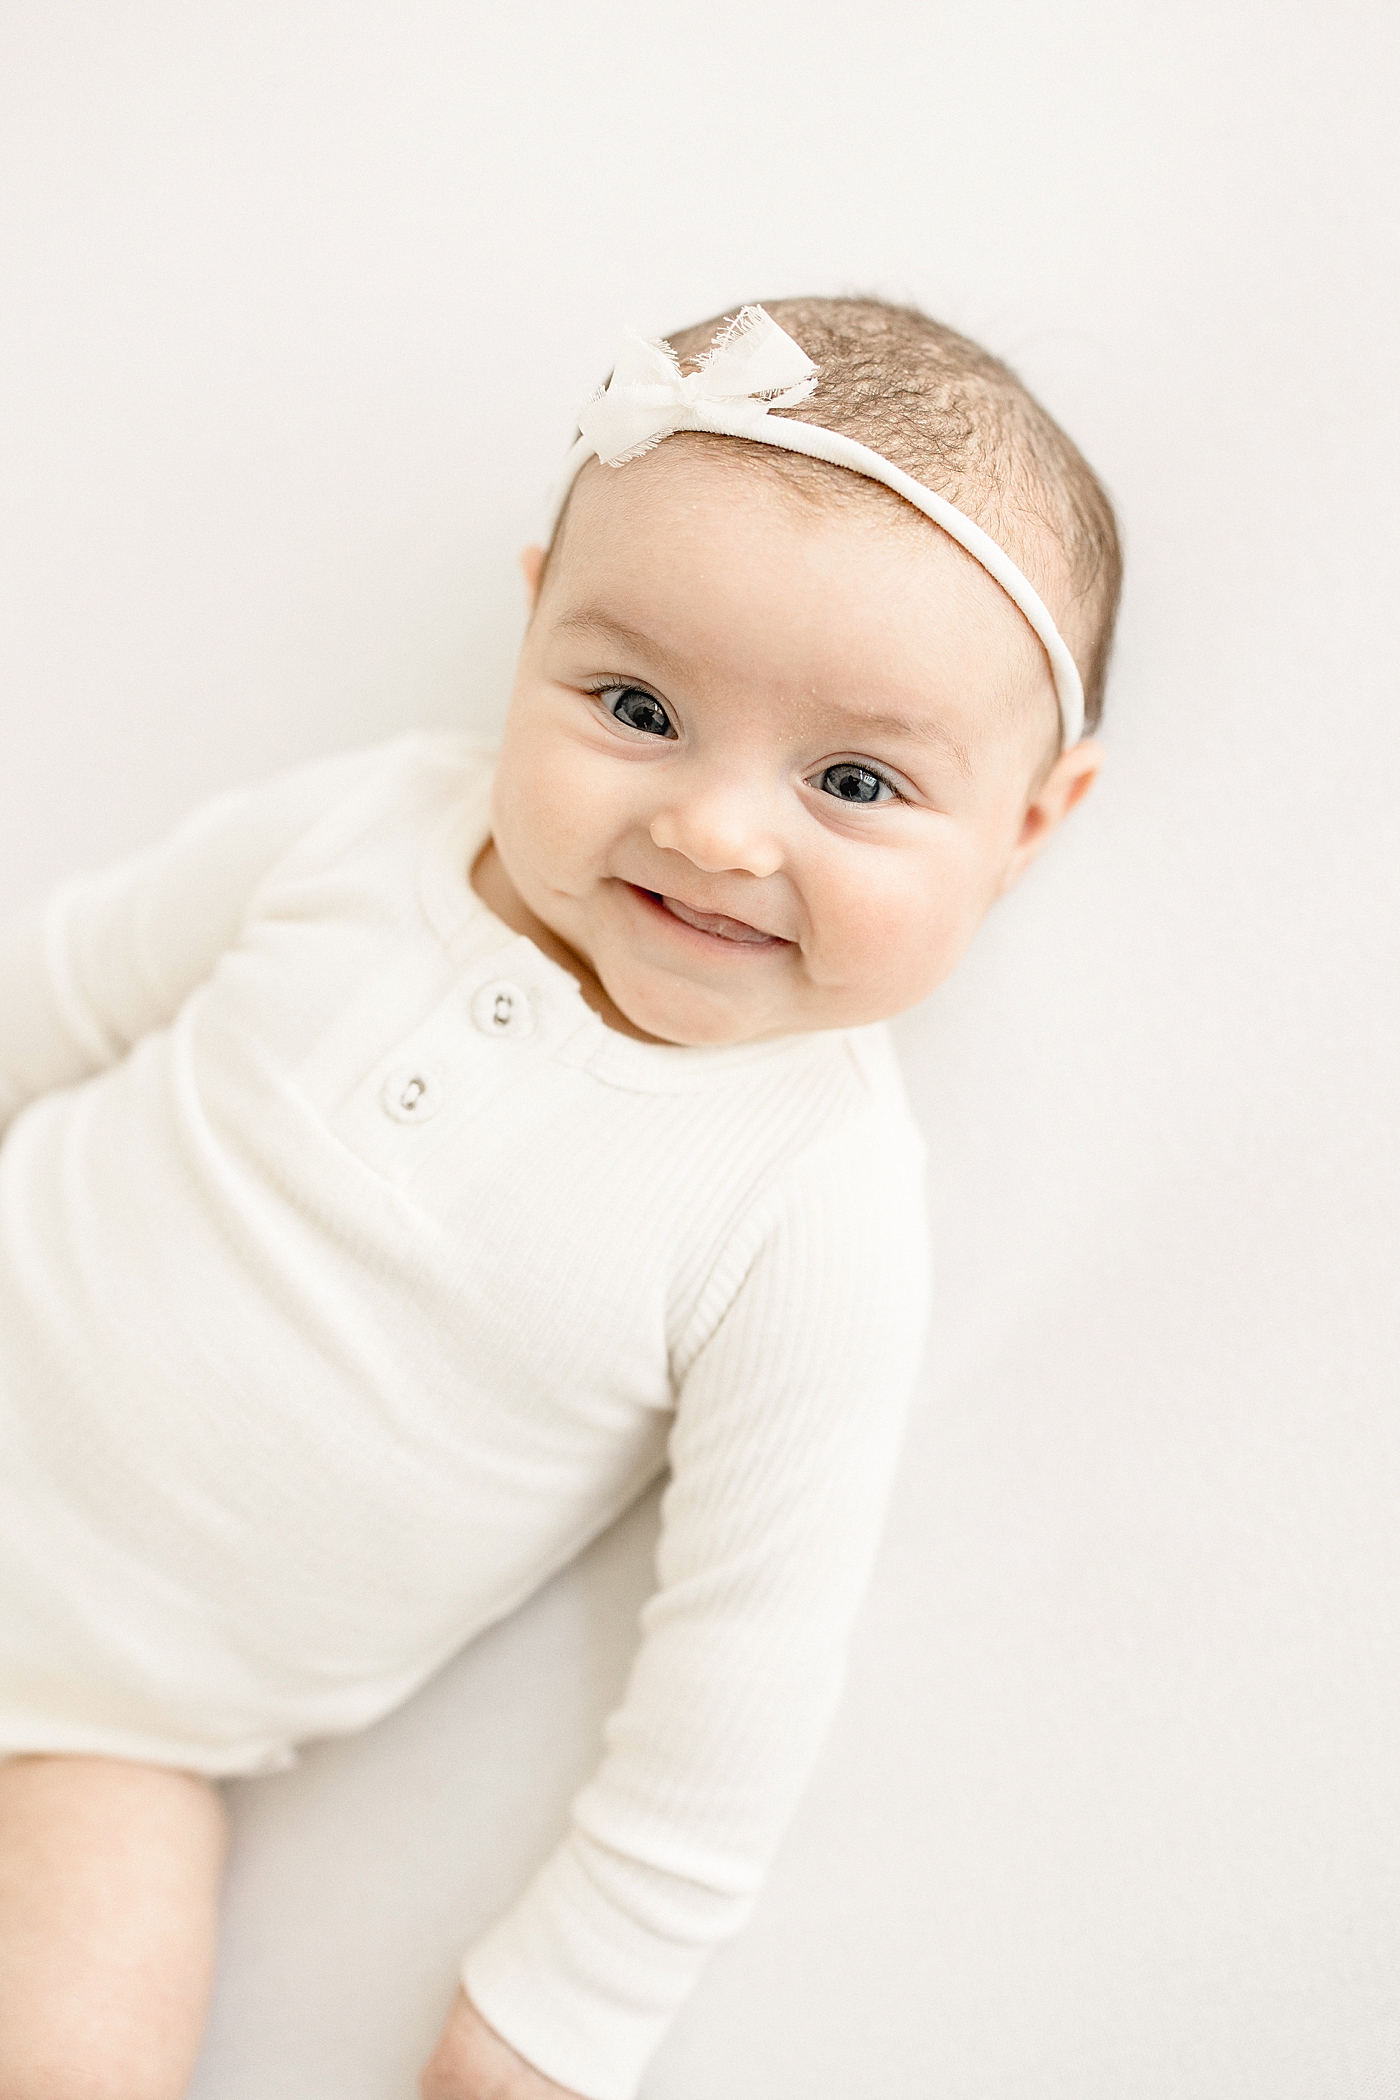 3 month old baby girl smiling during milestone session. Photo by Brittany Elise Photography.